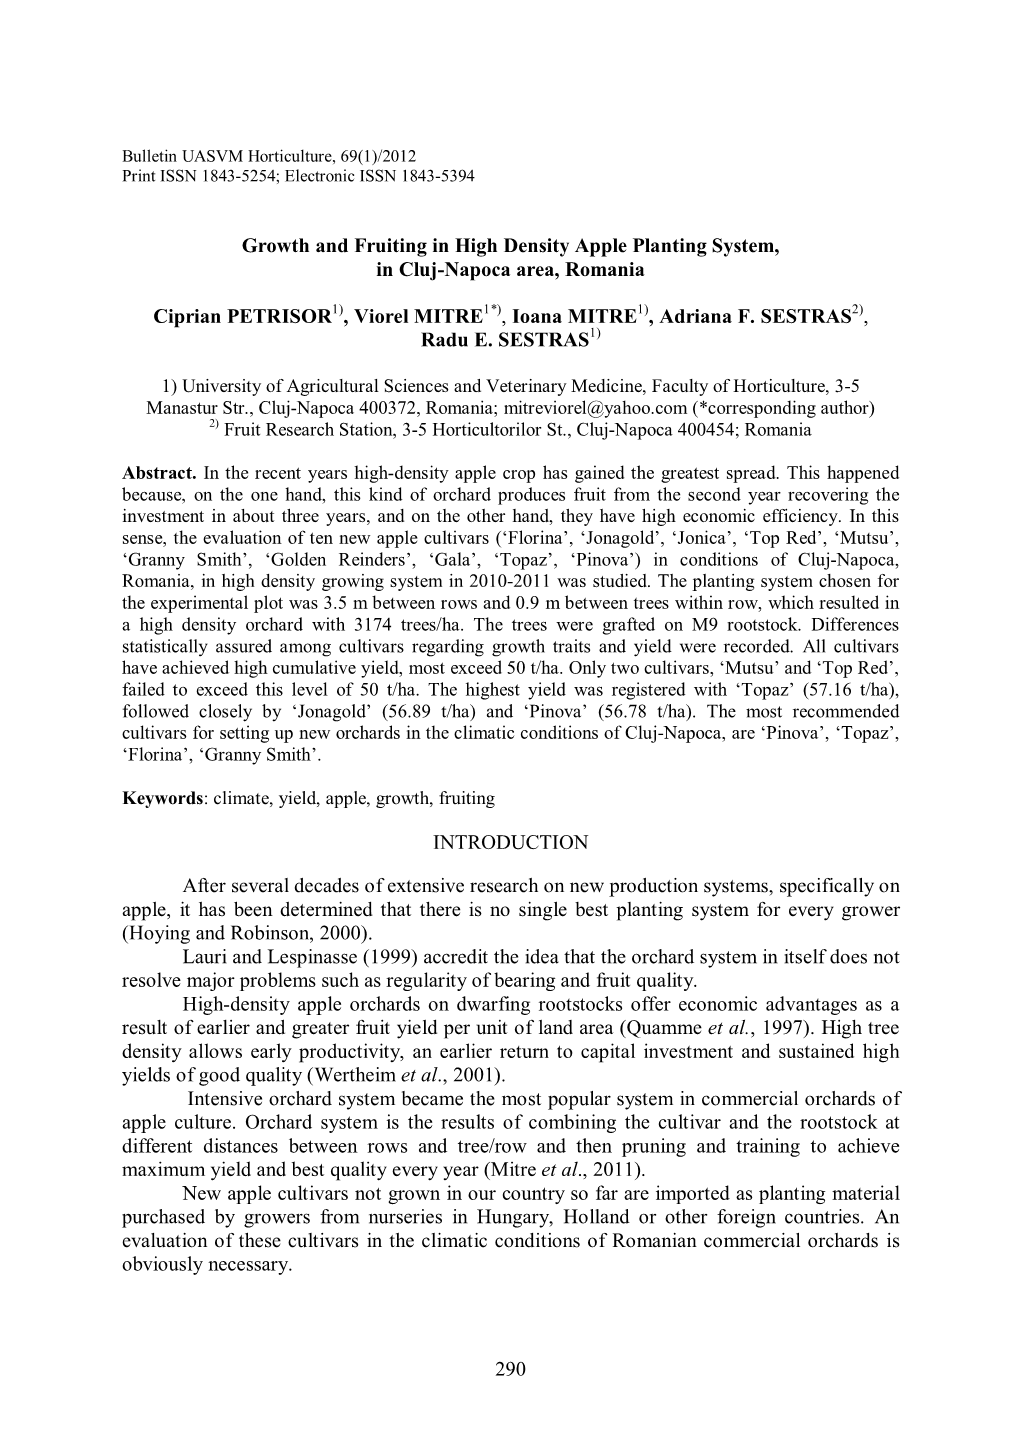 Growth and Fruiting in High Density Apple Planting System, in Cluj-Napoca Area, Romania Ciprian PETRISOR , Viorel MITRE , Ioana